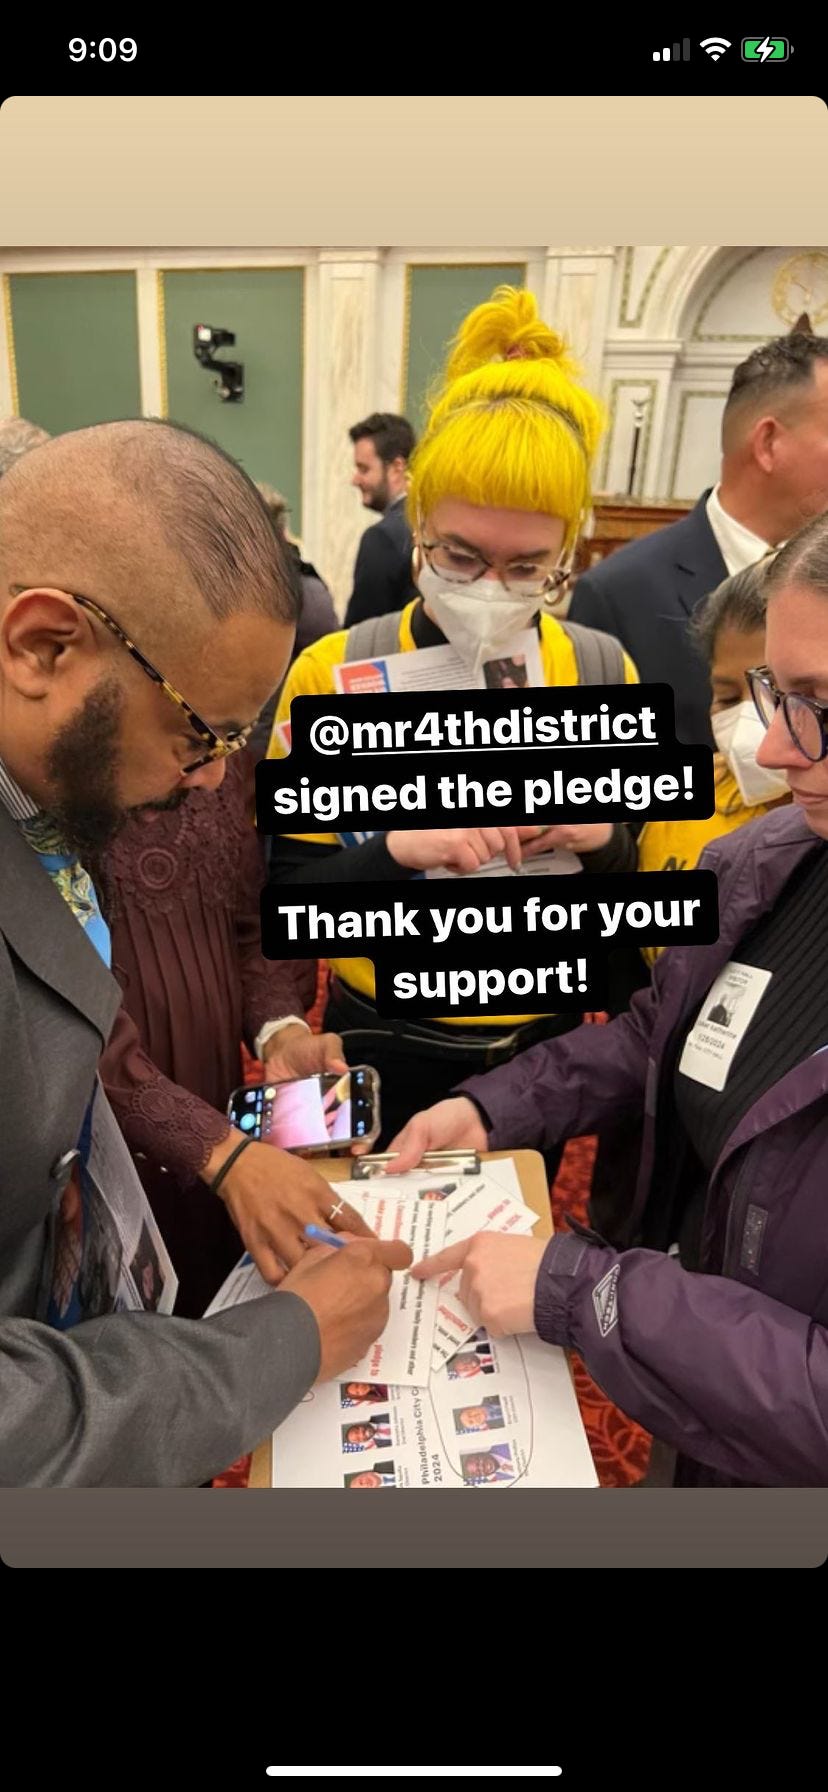 Worker holding a physical pledge out and a city council member is signing it.